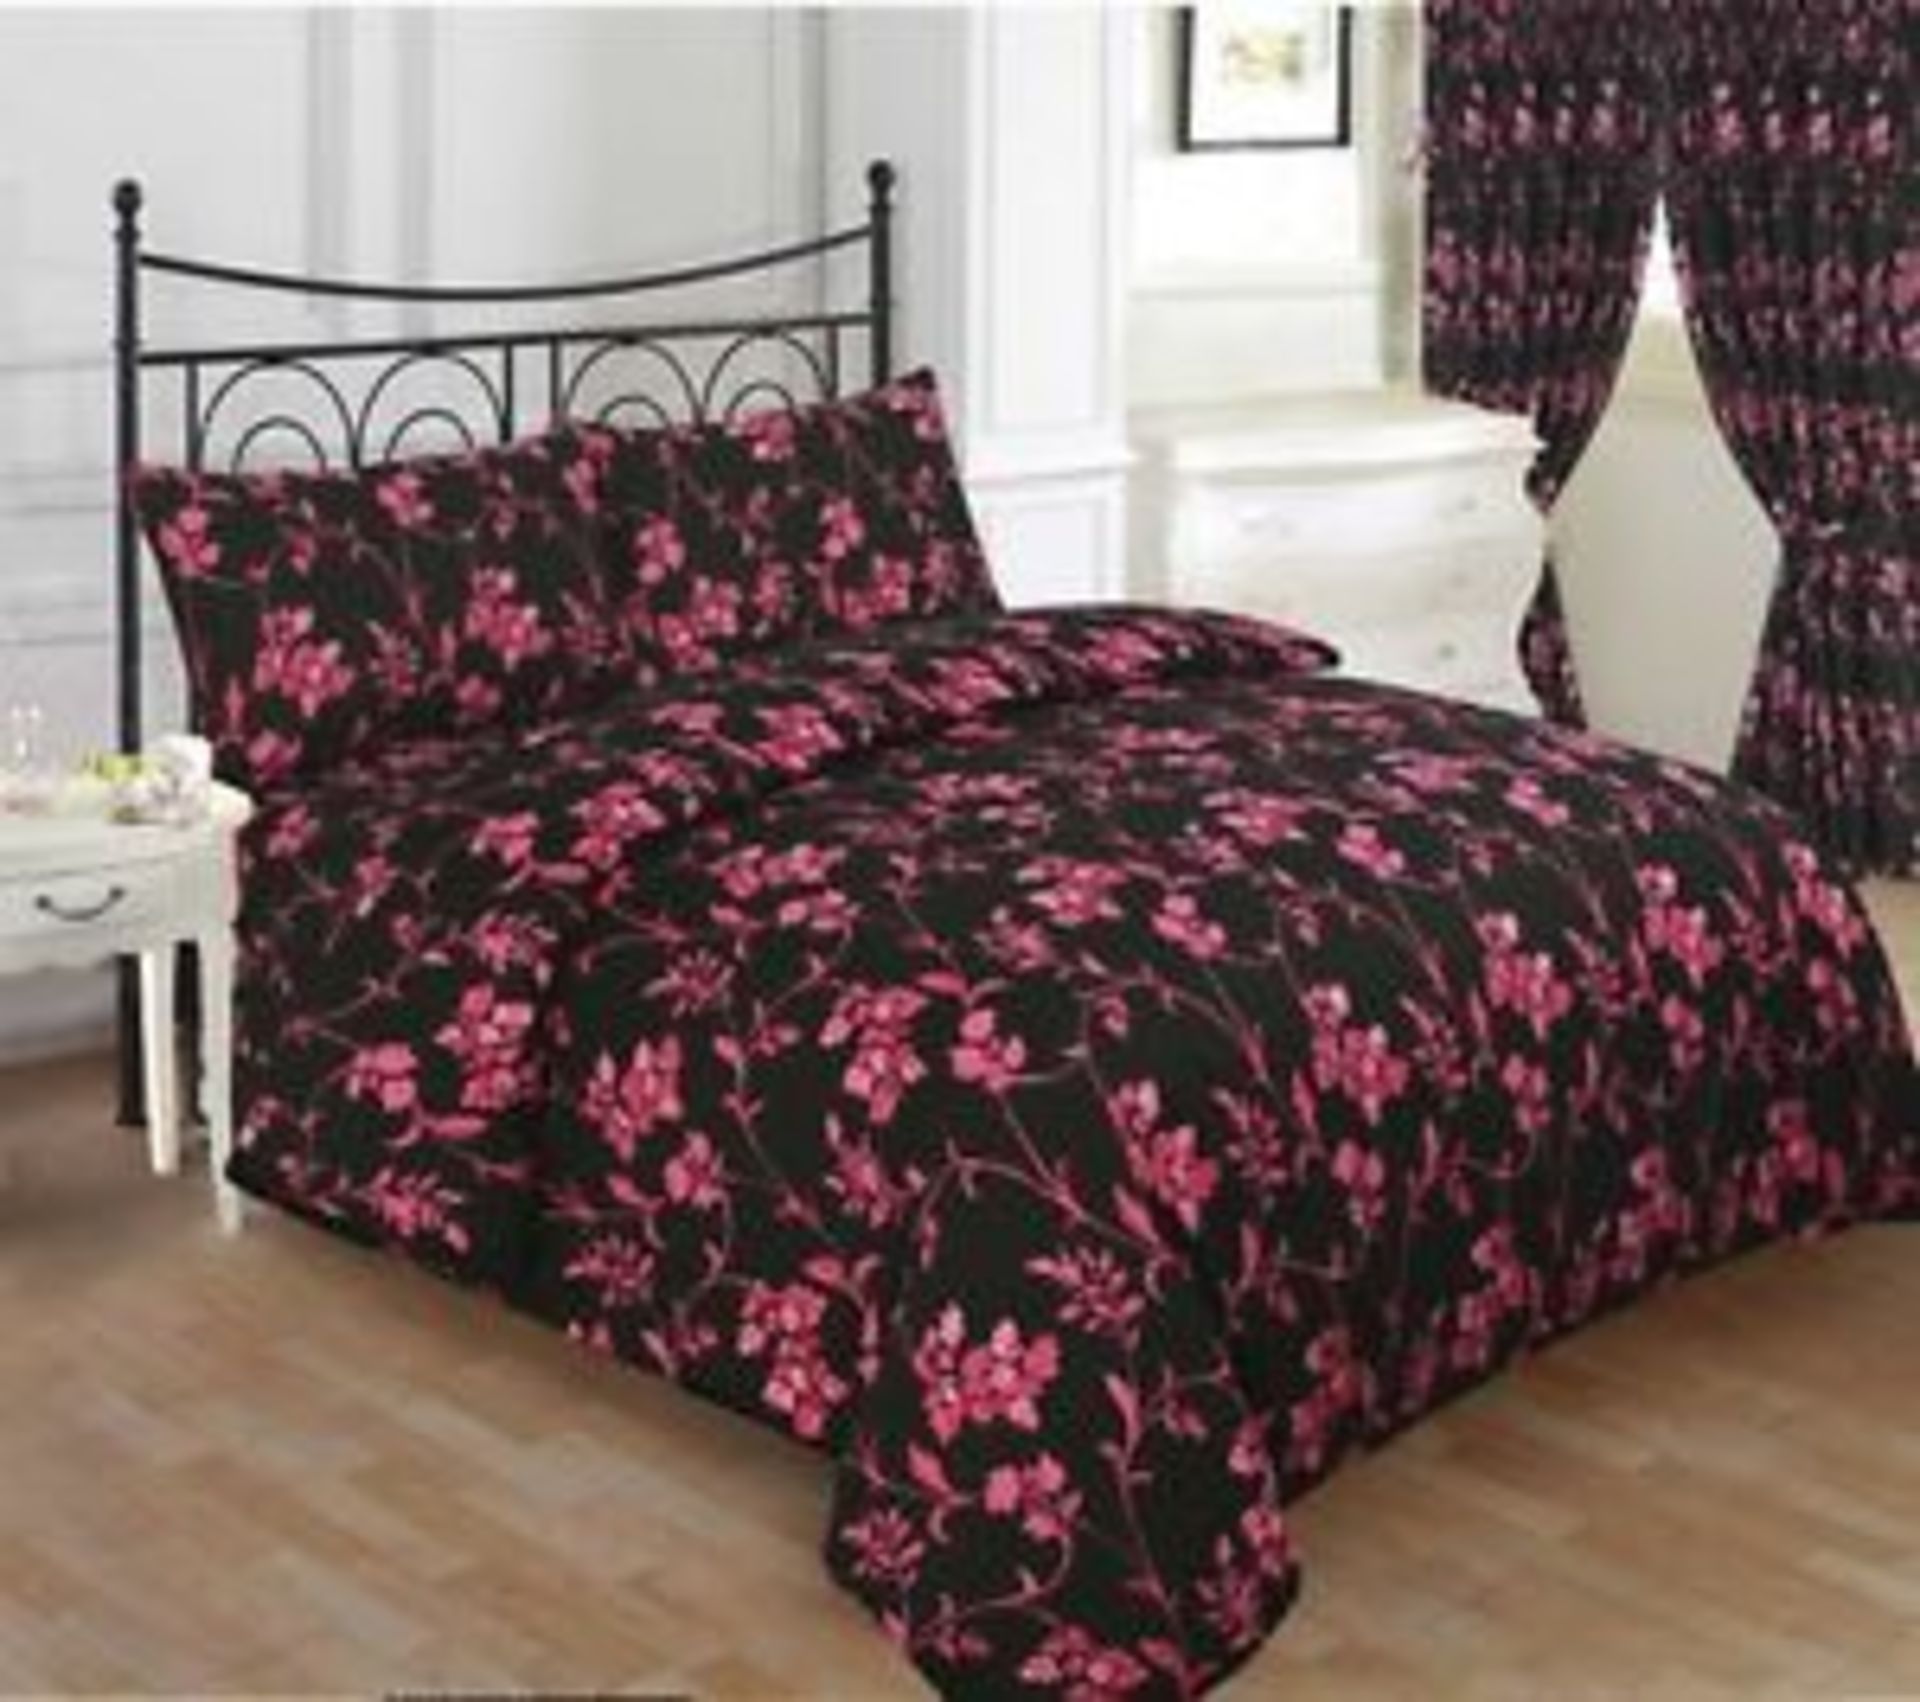 V Brand New 3 Piece Luxury Double Duvet Set Incl 2 Pillow Cases In Jasmine Pattern SRP20.99 X 2 YOUR